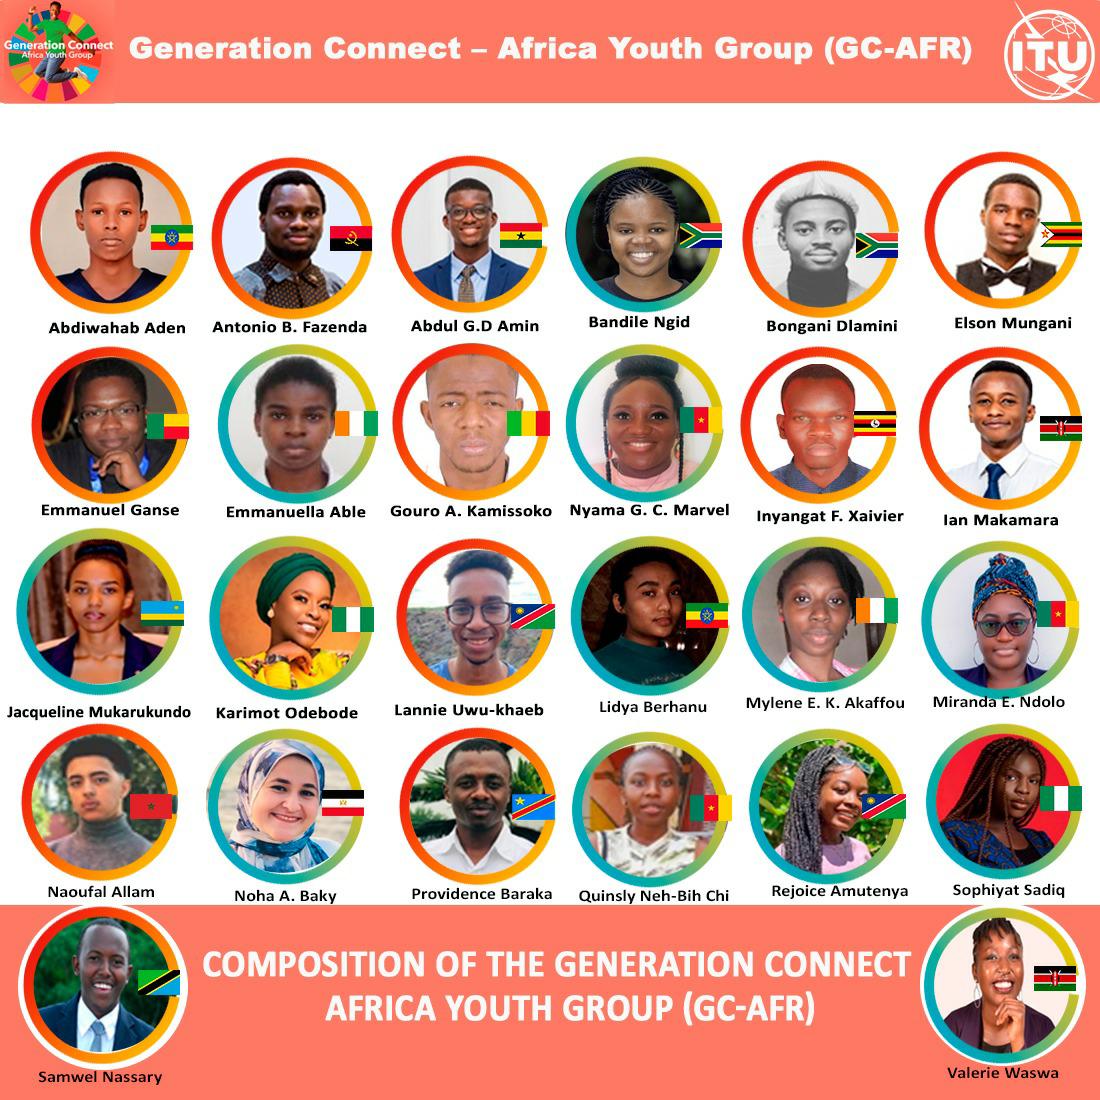 Generation Connect - Africa Youth Group (GC-AFR)